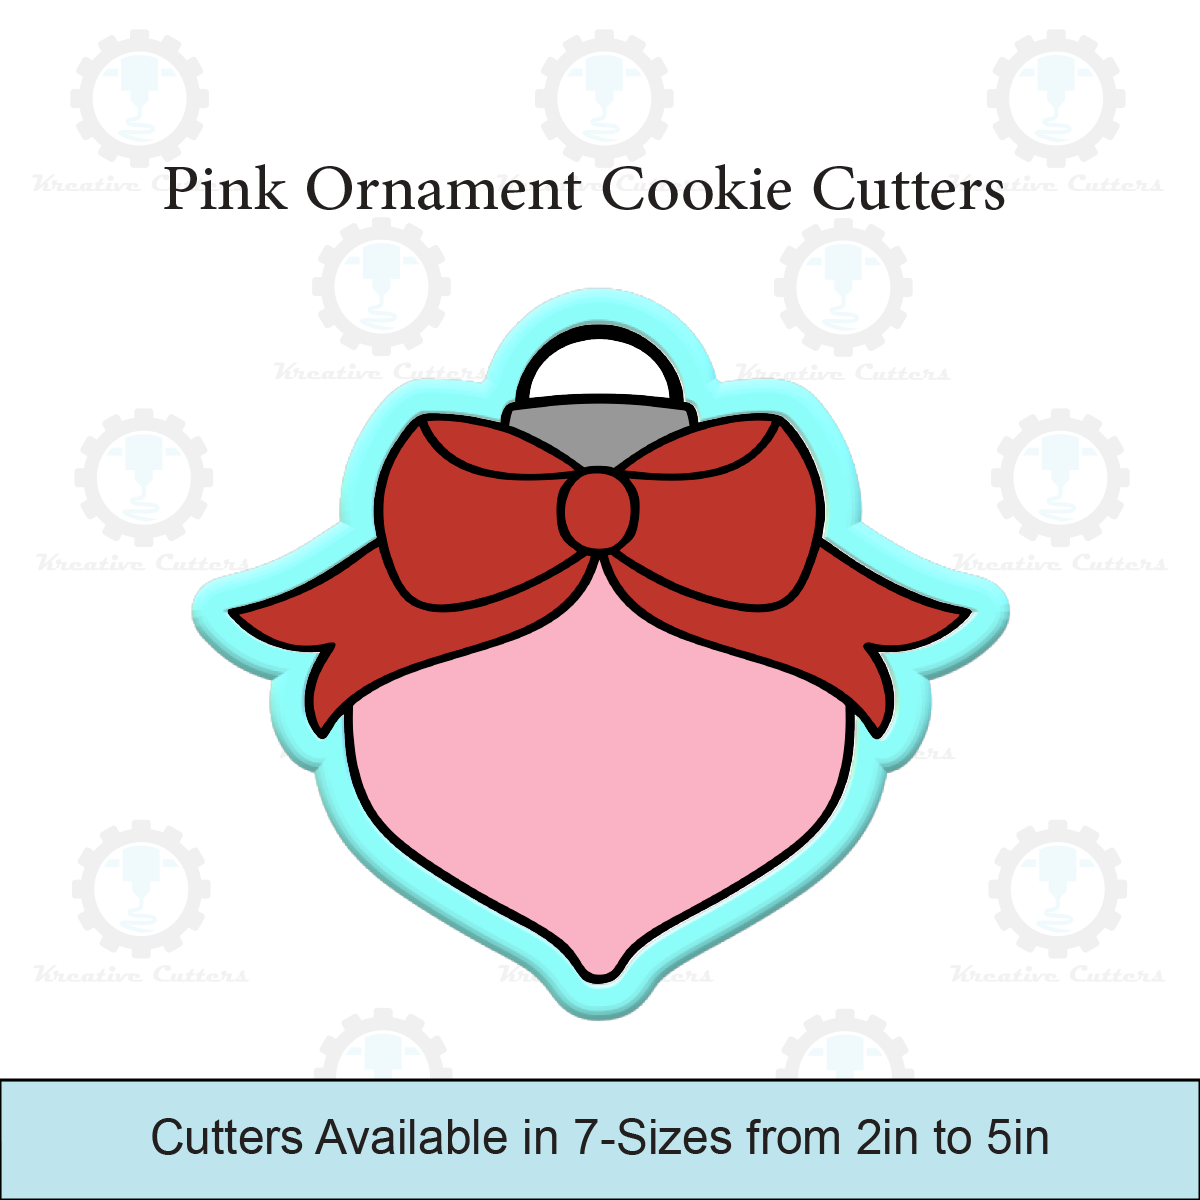 Pink Ornament Cookie Cutters